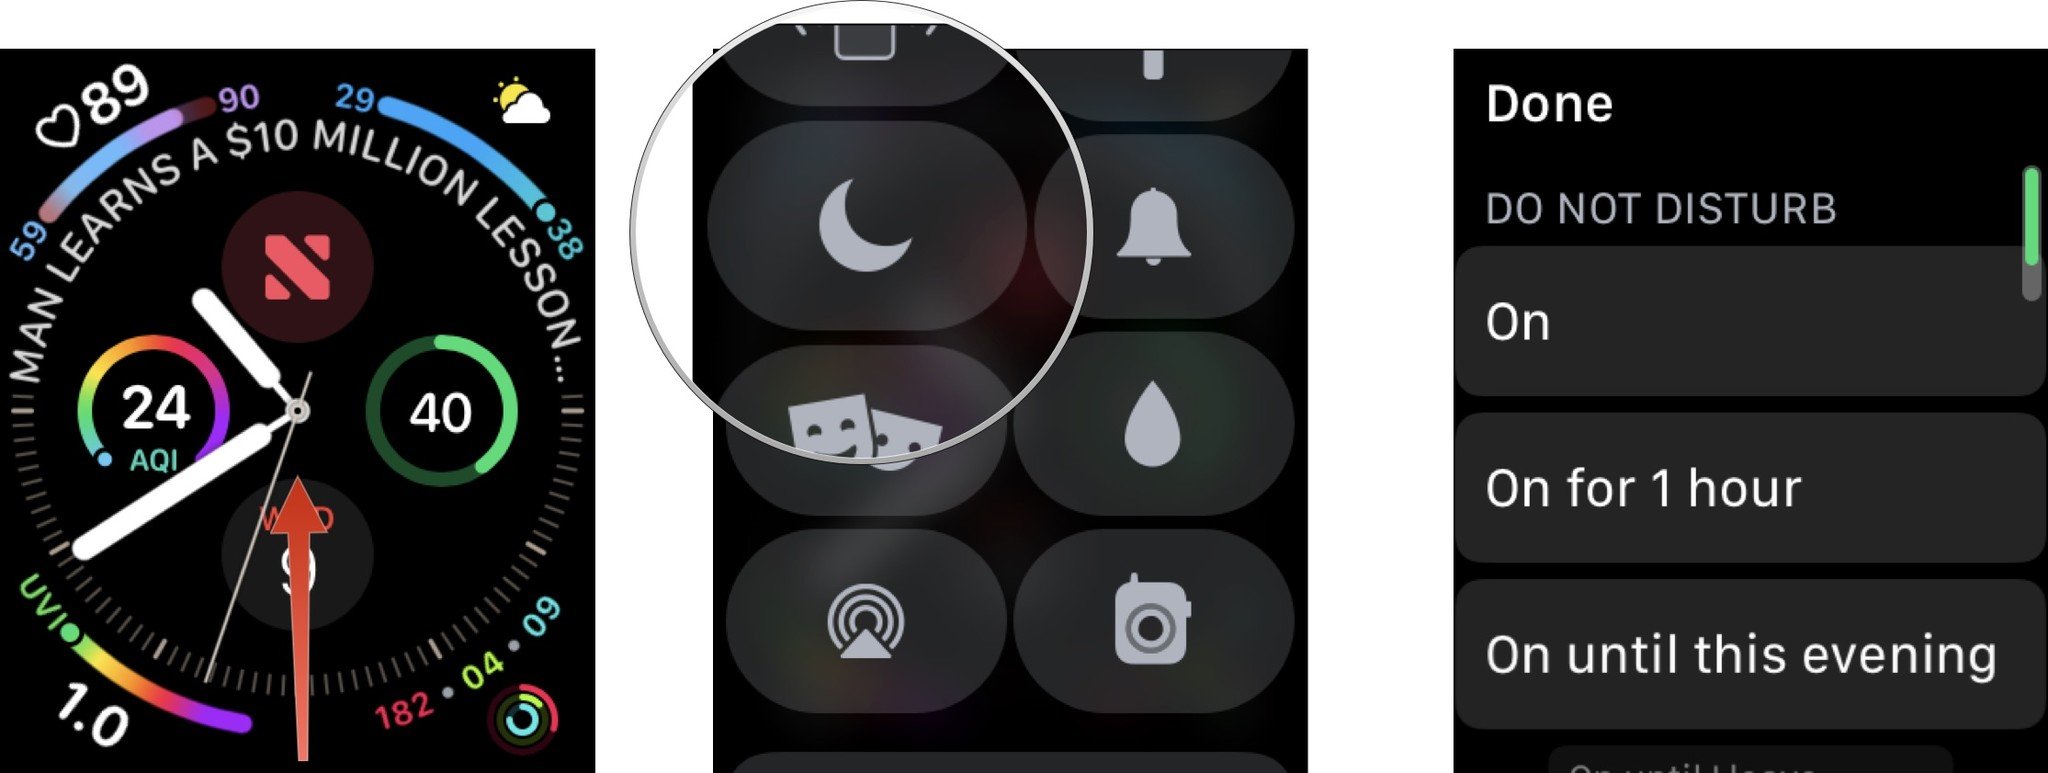 To manually enable Do Not Disturb on your Apple Watch, press the Digital Crown, swipe up and choose the Control Center. Tap the Do Not Disturb button. Choose a duration for Do Not Disturb/